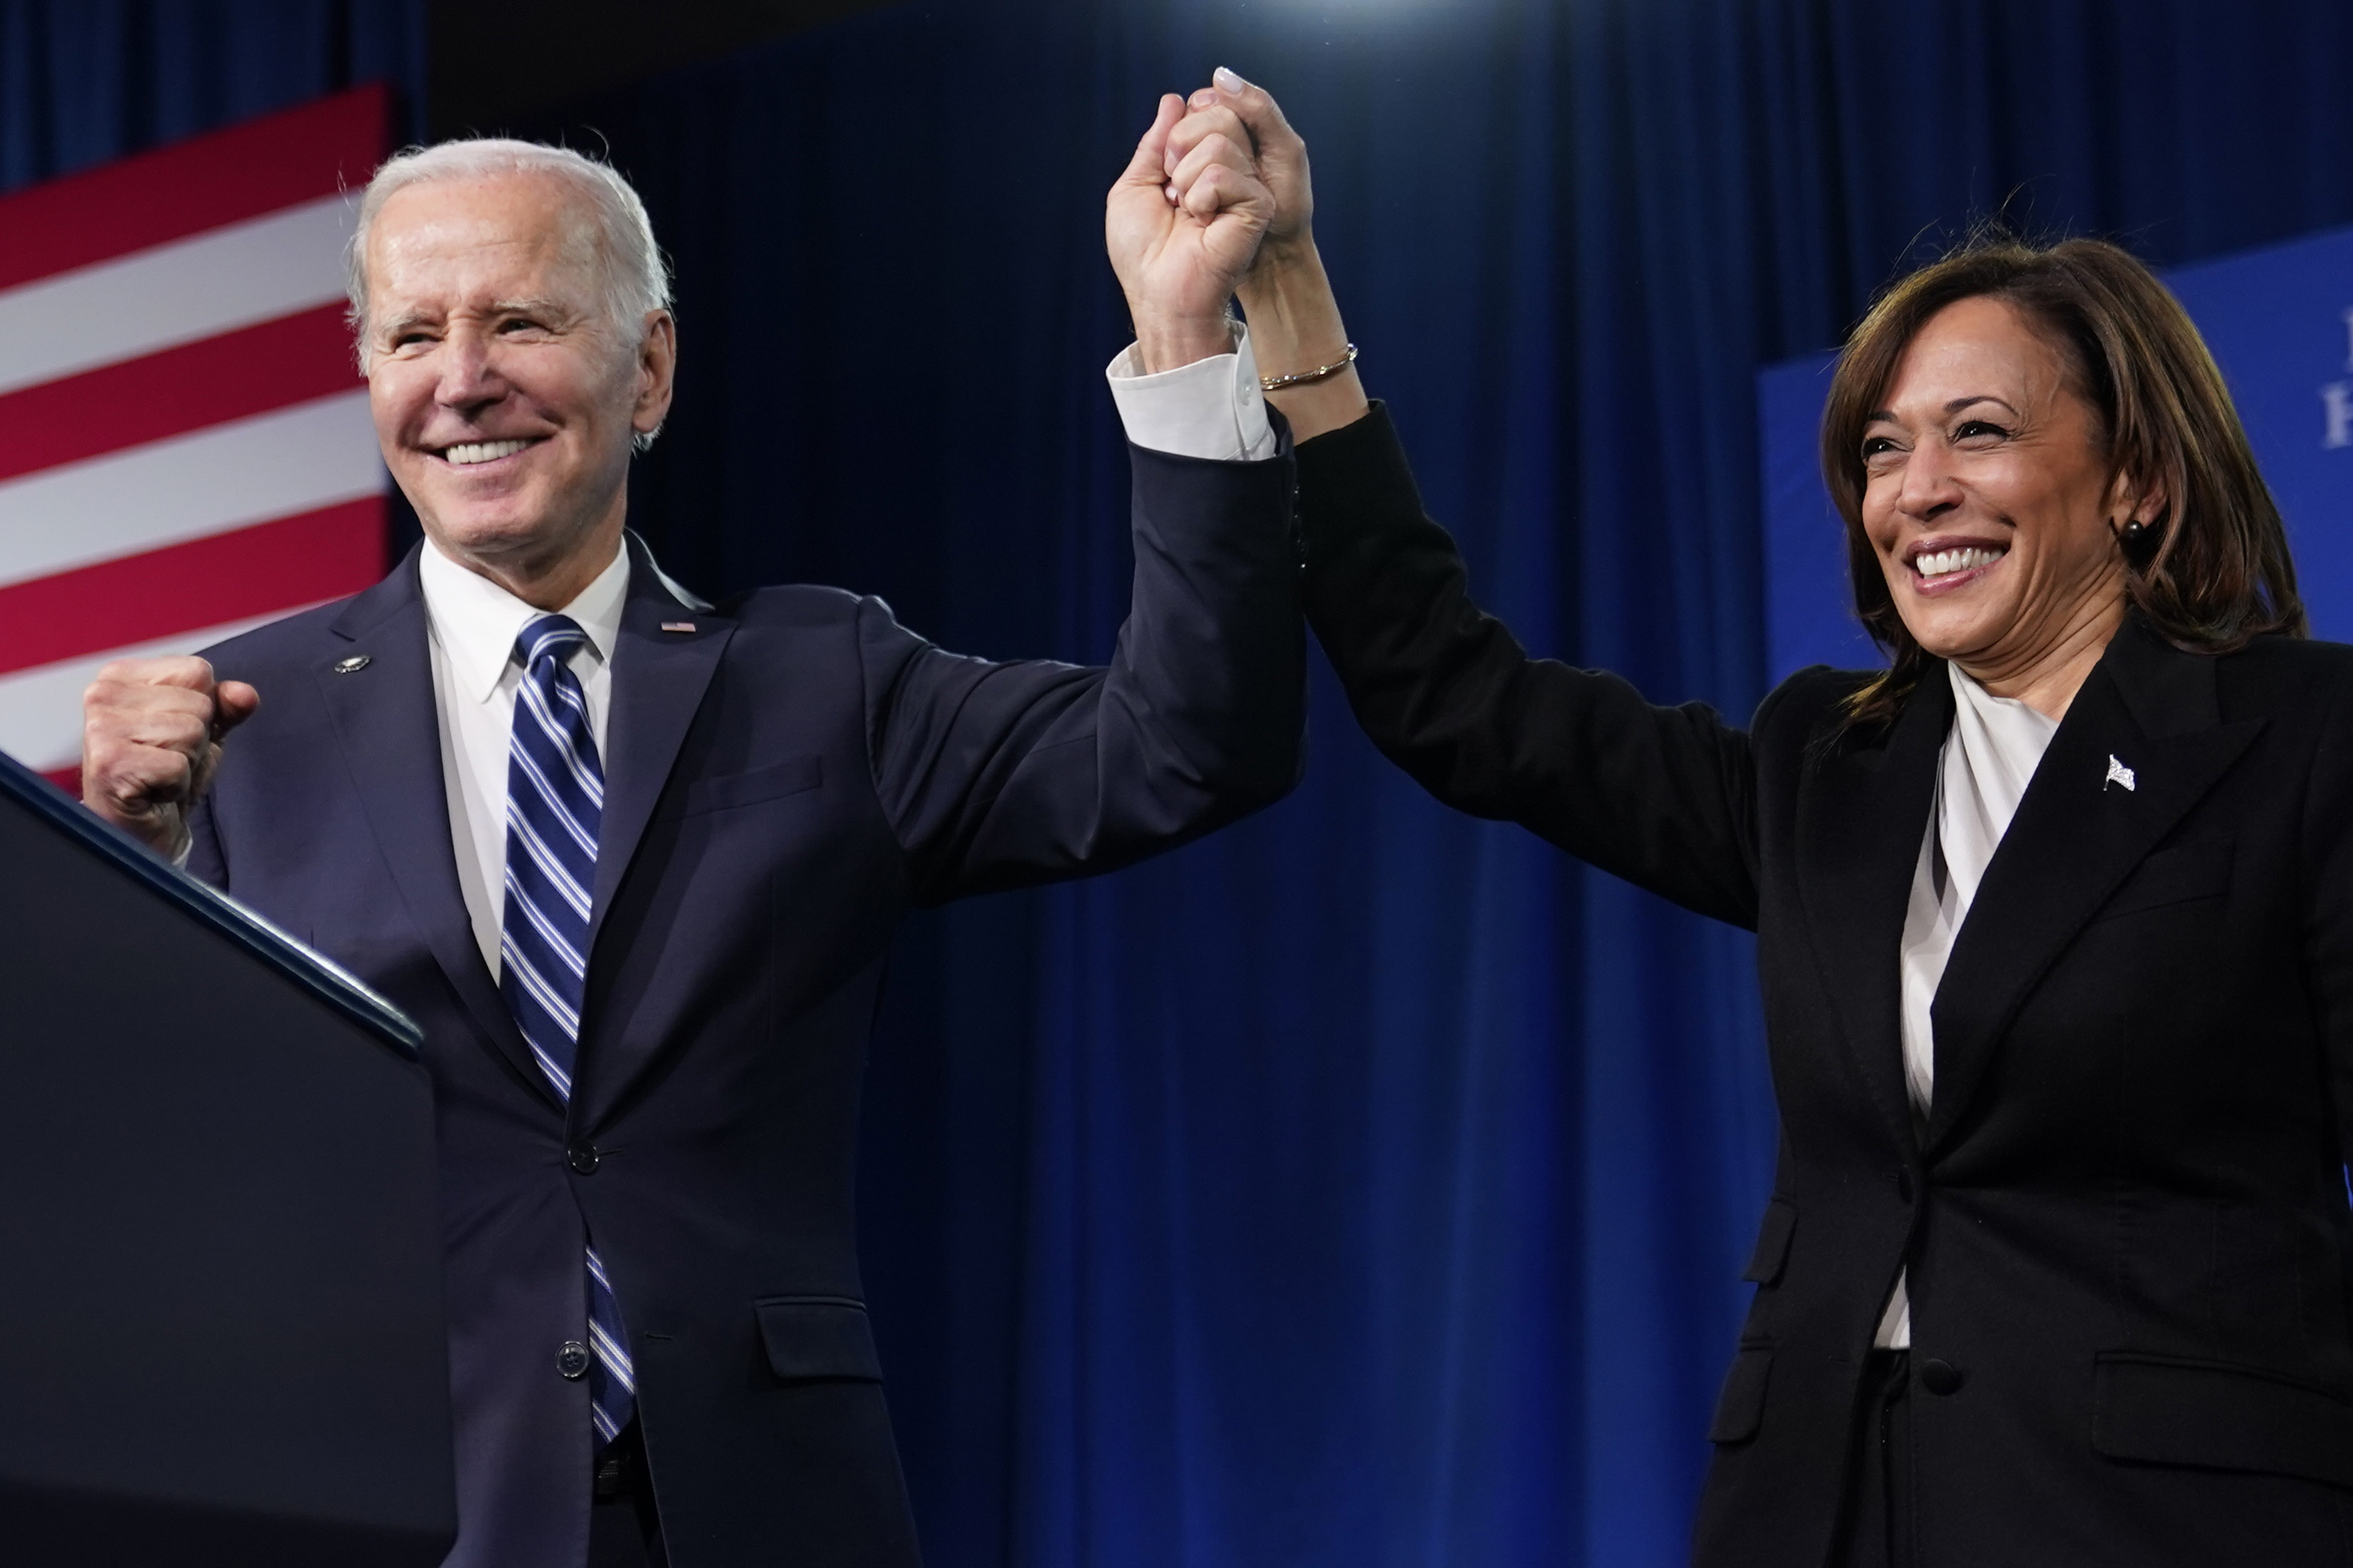 FILE - President Joe Biden and Vice President Kamala Harris stand on stage at the Democratic National Committee winter meeting, Feb. 3, 2023, in Philadelphia. Harris has been the White House's first line of defense after President Joe Biden's faltering performance in last week's debate with Donald Trump. (AP Photo/Patrick Semansky, File)